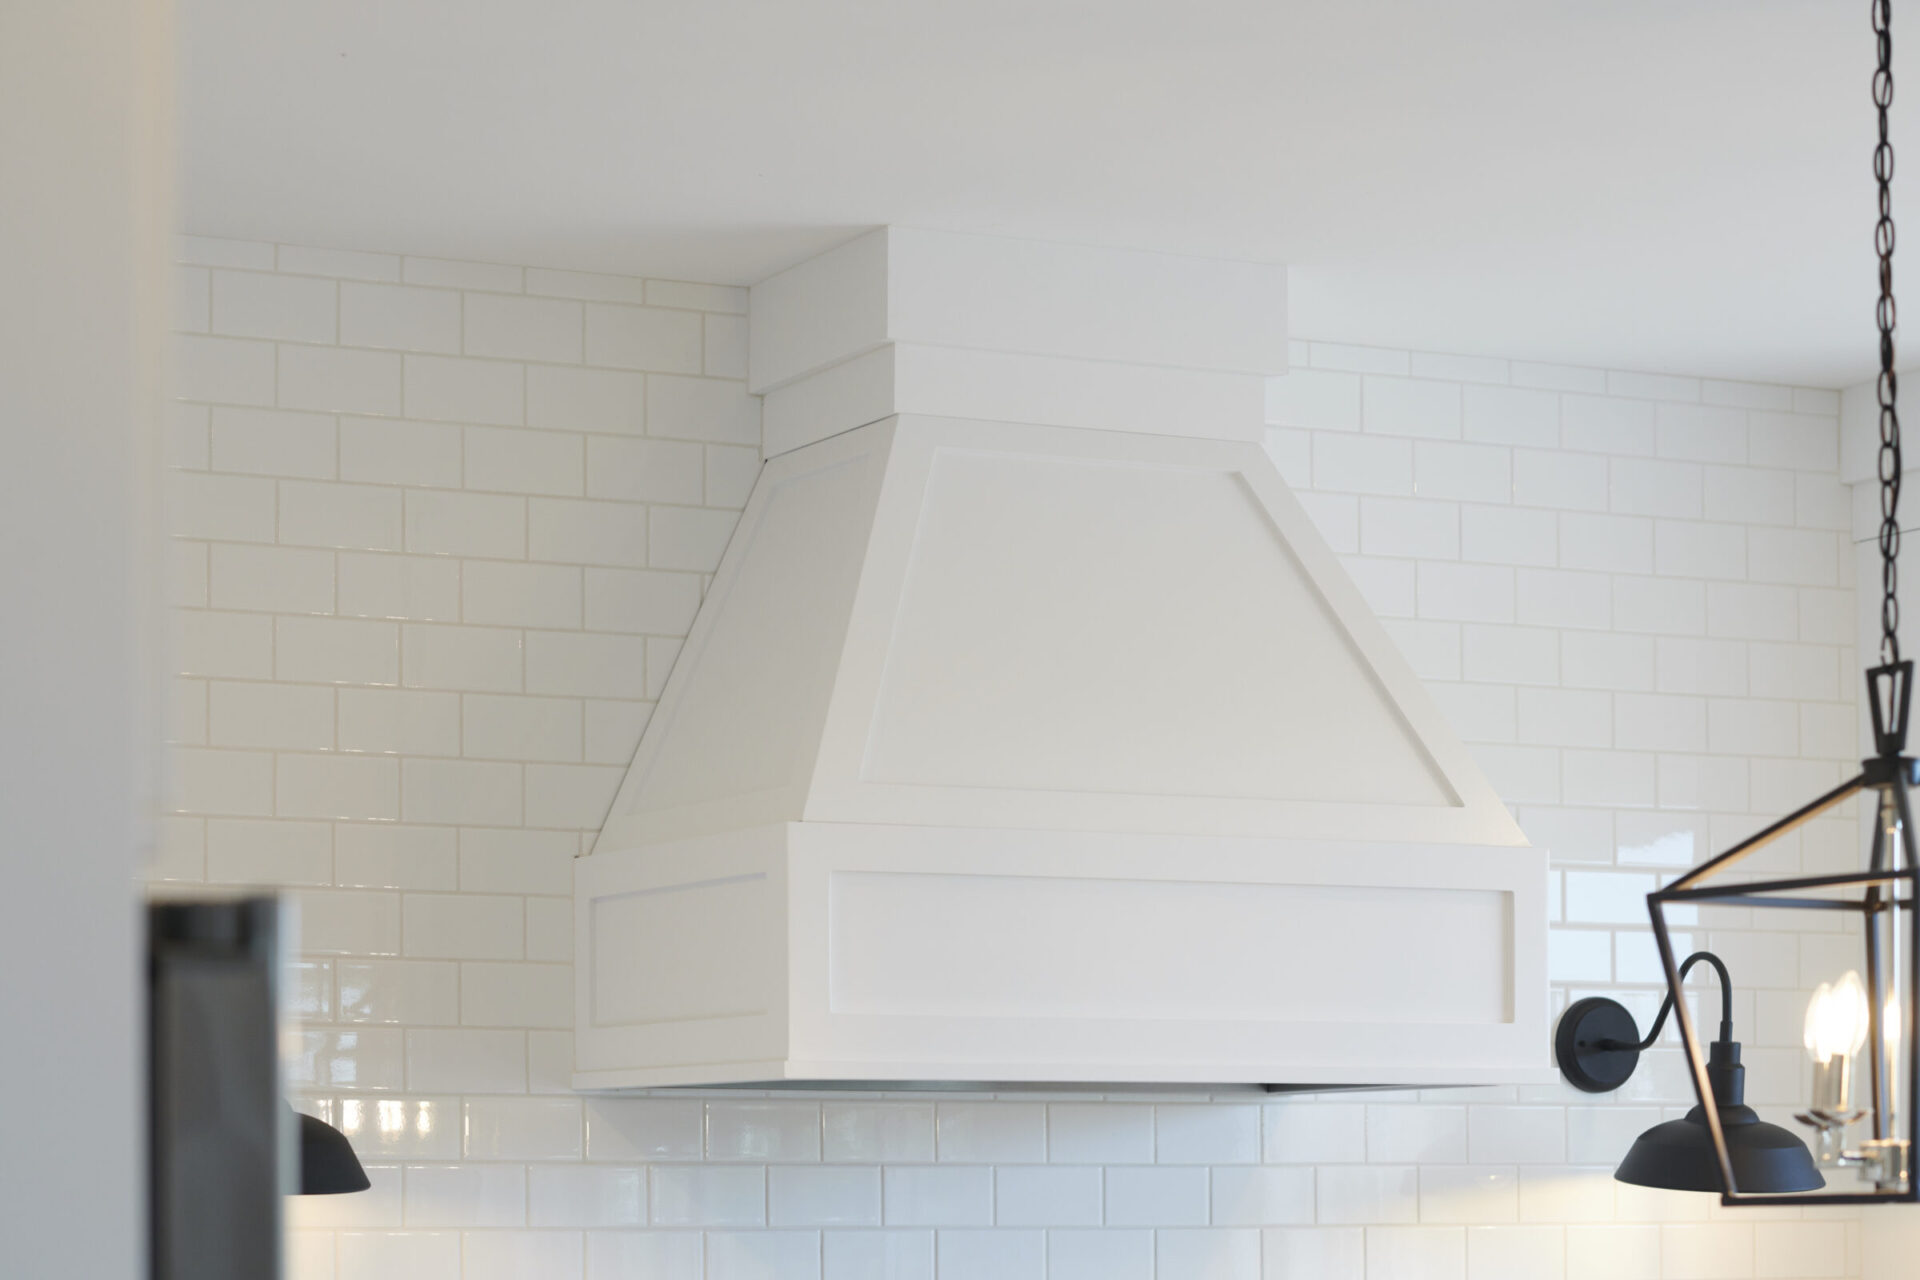 A modern kitchen with white subway tiles features a large white range hood. A black pendant light with an exposed bulb hangs to the right.